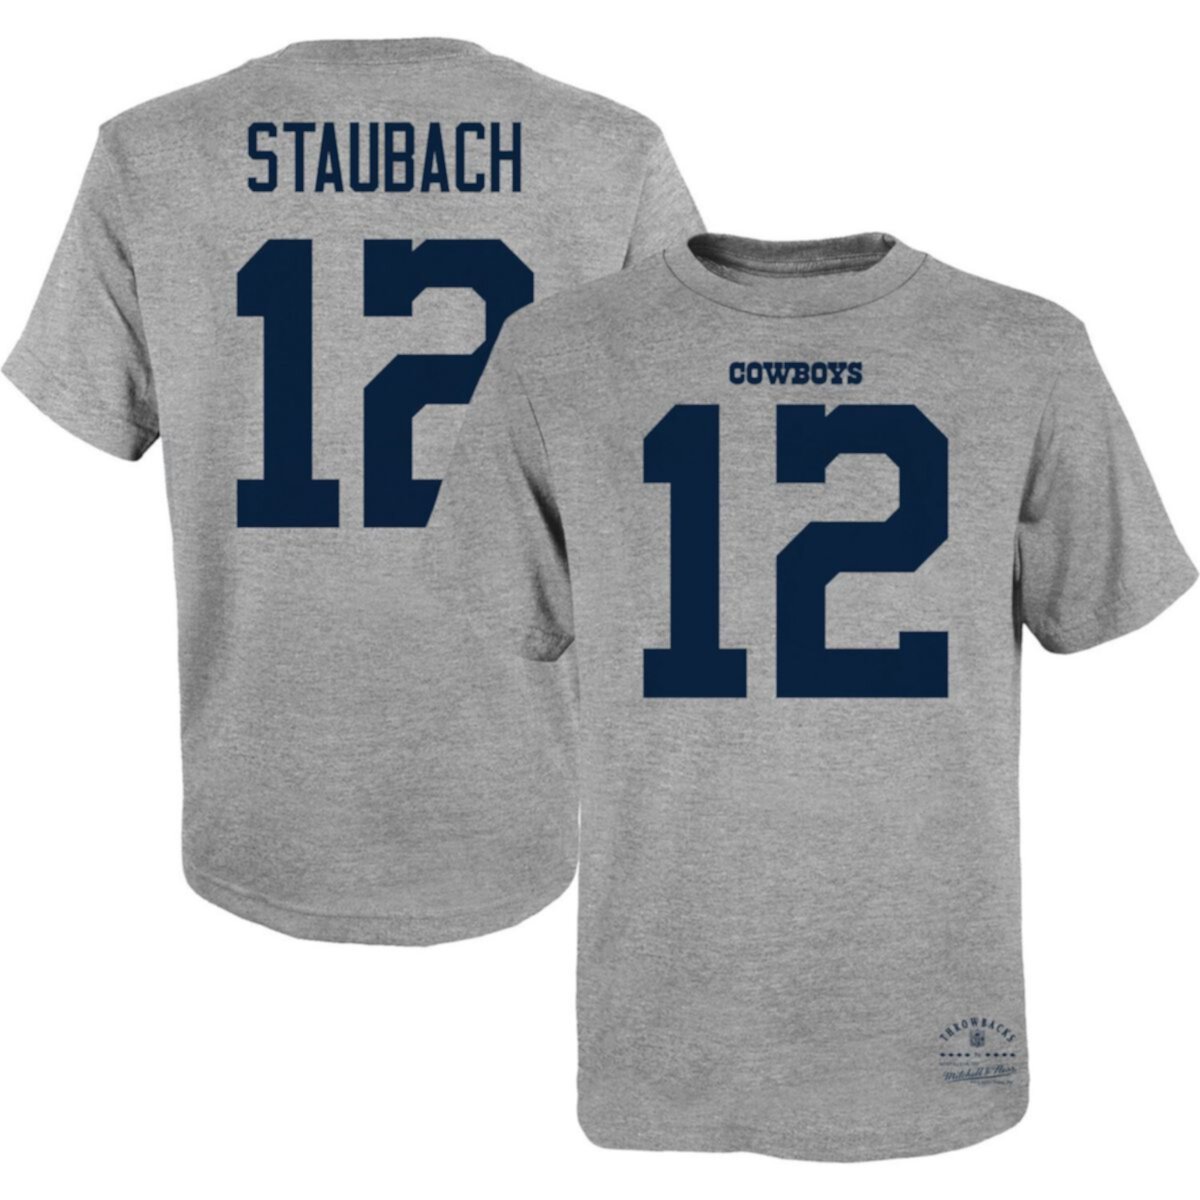 Youth Mitchell & Ness Roger Staubach Heathered Gray Dallas Cowboys Retired Retro Player Name & Number T-Shirt Unbranded